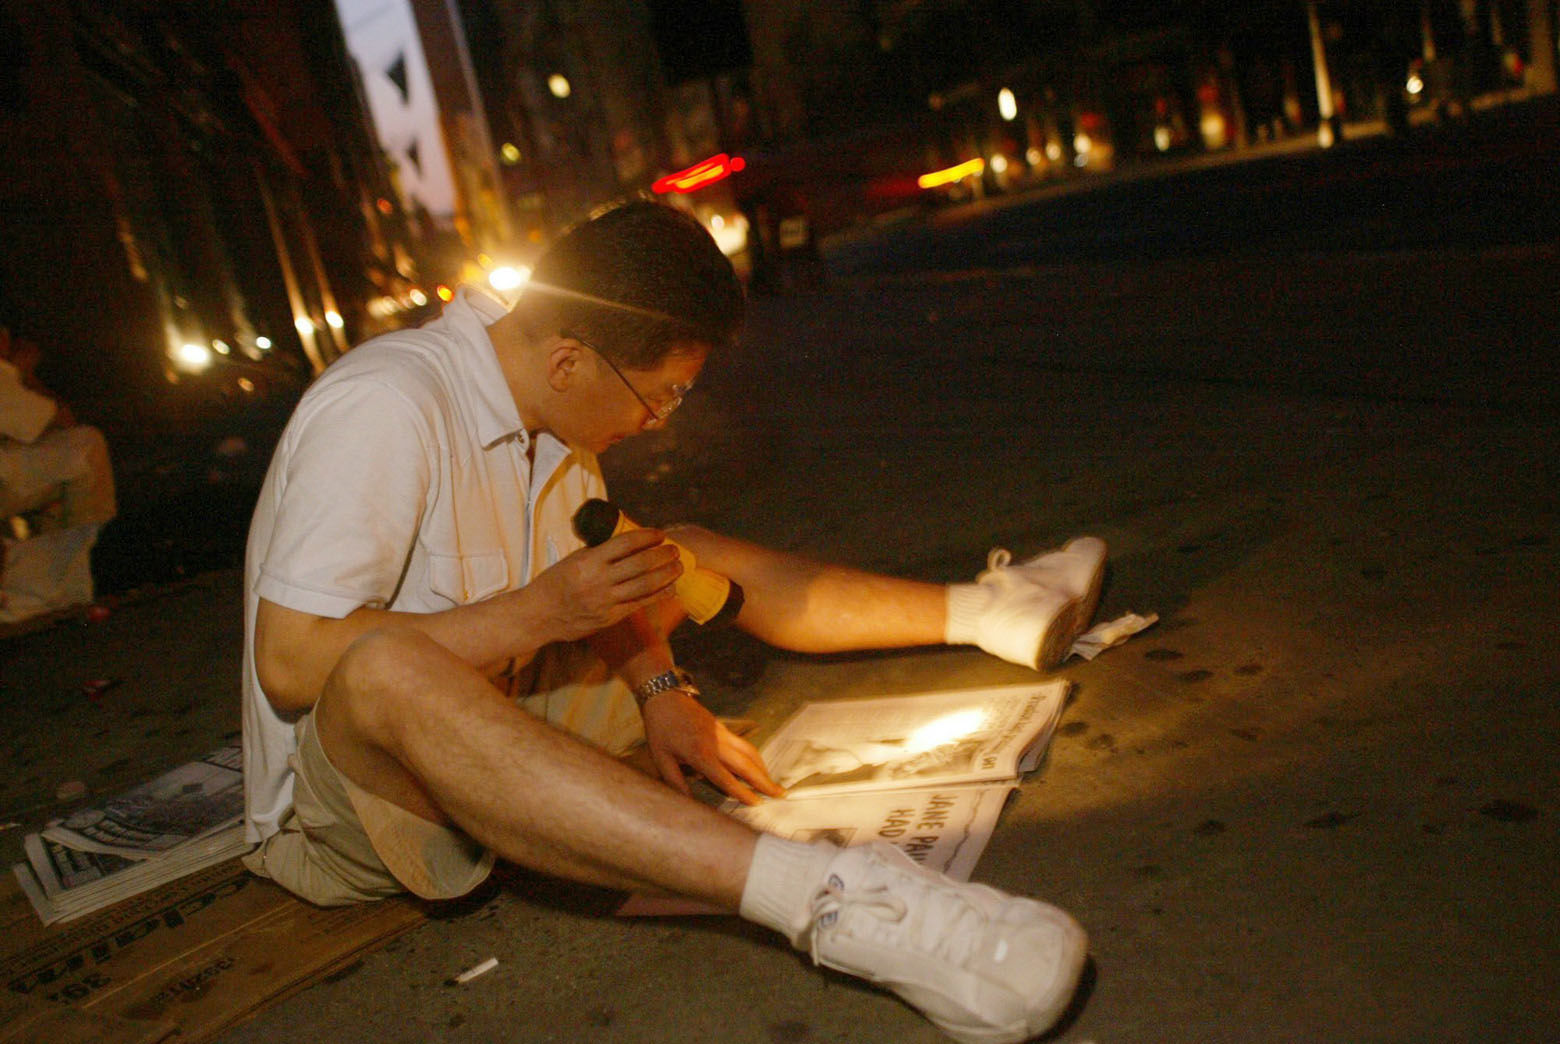 Joung Yun of Flushing, Queens, reads a newpaper by flashlight as he sits on the sidewalk at New York's Fifth Ave. early Friday morning Aug. 15, 2003. A power outage hit most of northeastern United States Thursday afternoon, leaving the city in the dark. (AP Photo/Joe Kohen)